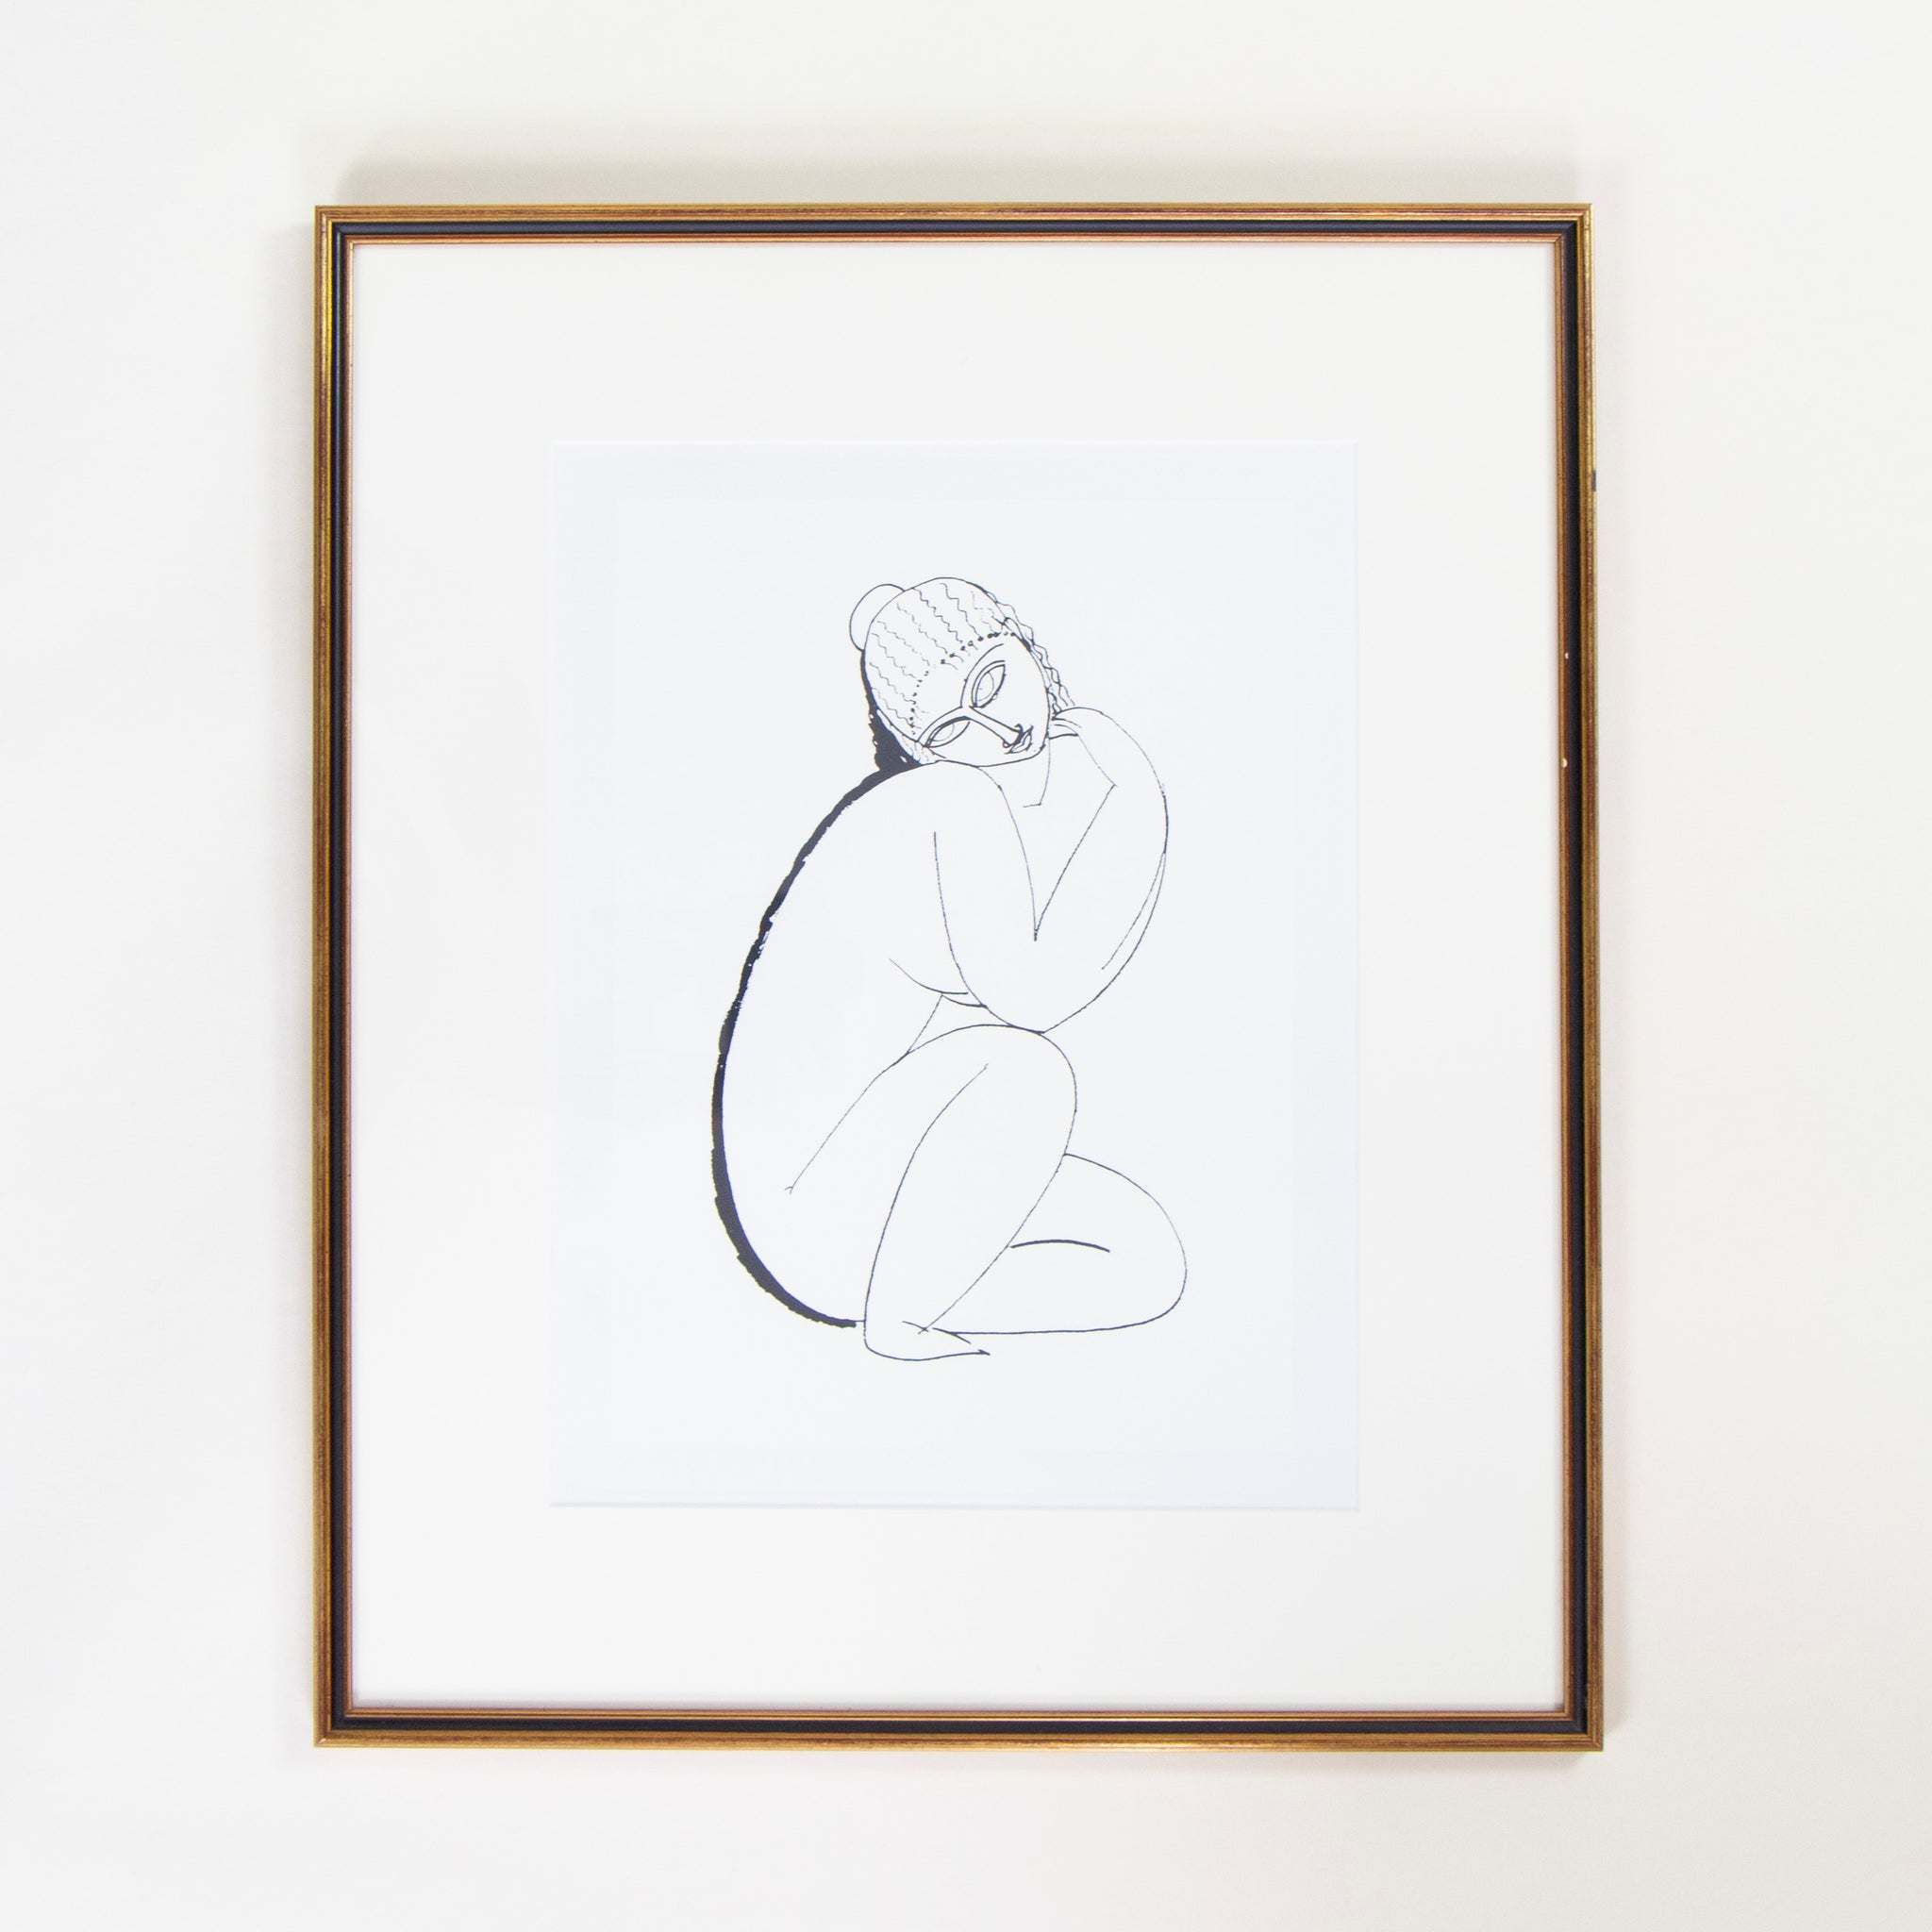 Black line figure drawing of African Woman 